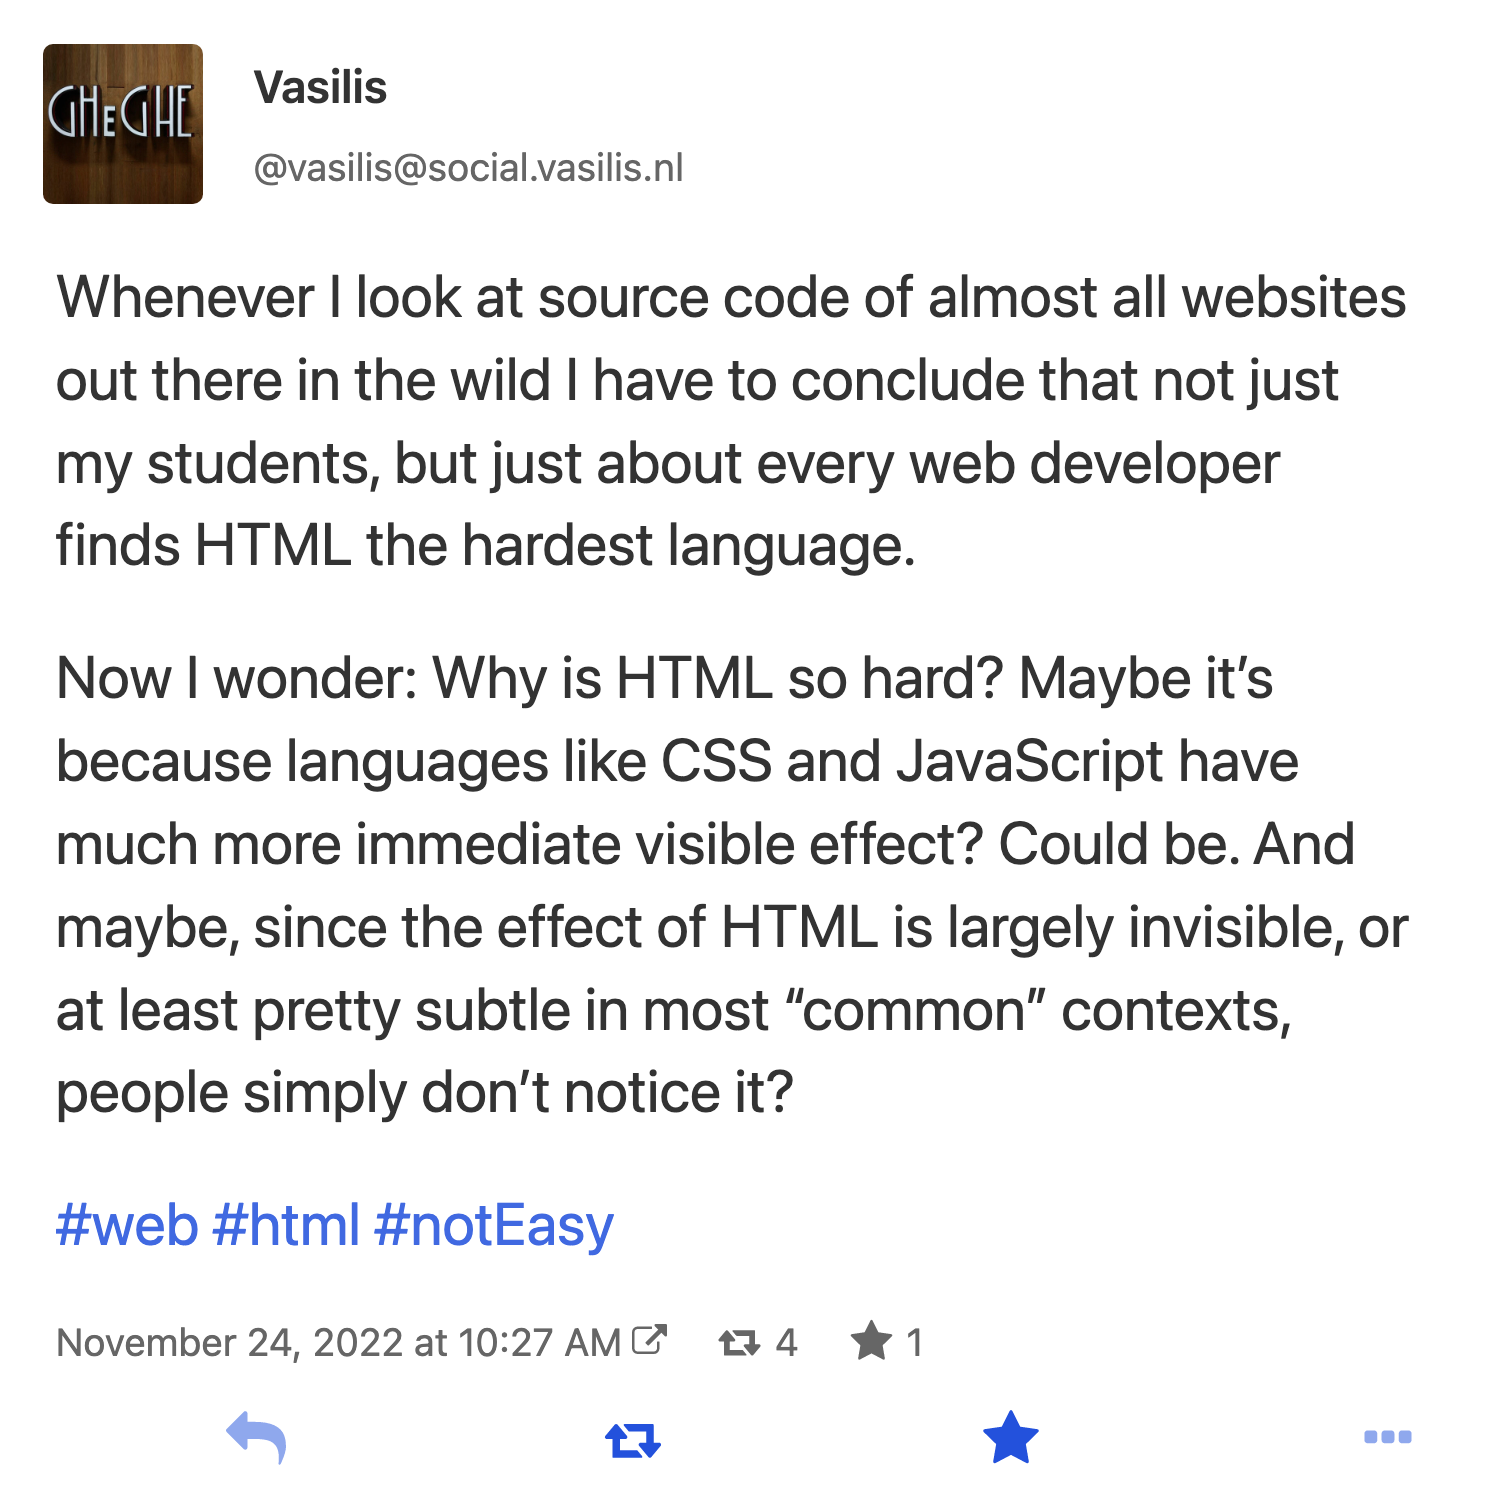 Mastodon toot from Vasilis: Whenever I look at source code of almost all websites out there in the wold I have to conclude that not just my students, but just about every web developer finds HTML the hardest language. Now I wonder: Why is HTML so hard? Maybe it's because languages like CSS and JavaScript have much more immediate visible effect? Could be. And maybe, since the effect of HTML is largely invisible, at least pretty subtle in most common contexts, people simply don't notice it?